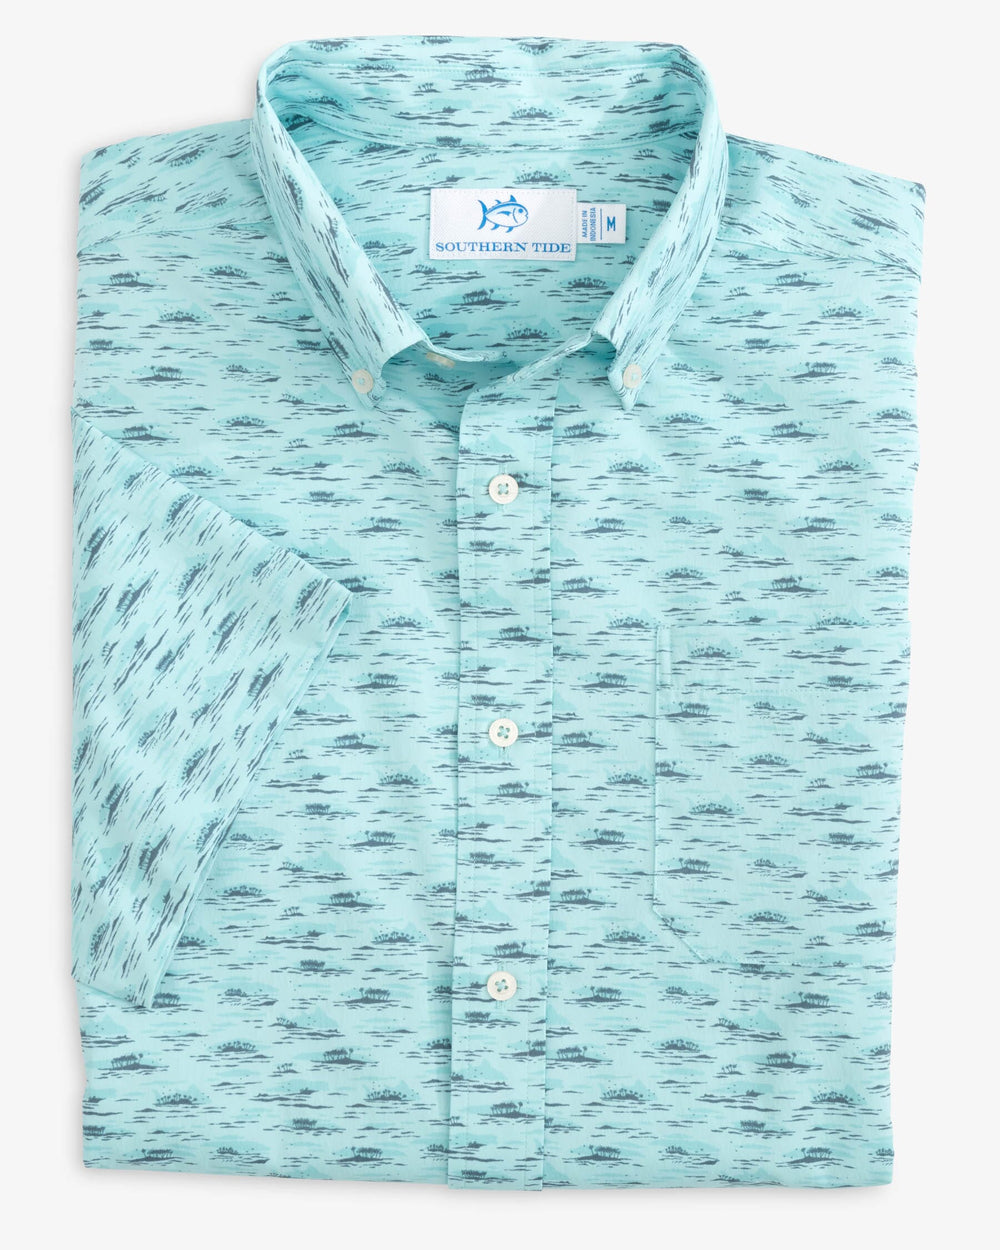 The folded view of the Southern Tide Sea Forest Intercoastal Short Sleeve Button Down Sport Shirt by Southern Tide - Turquoise Sea